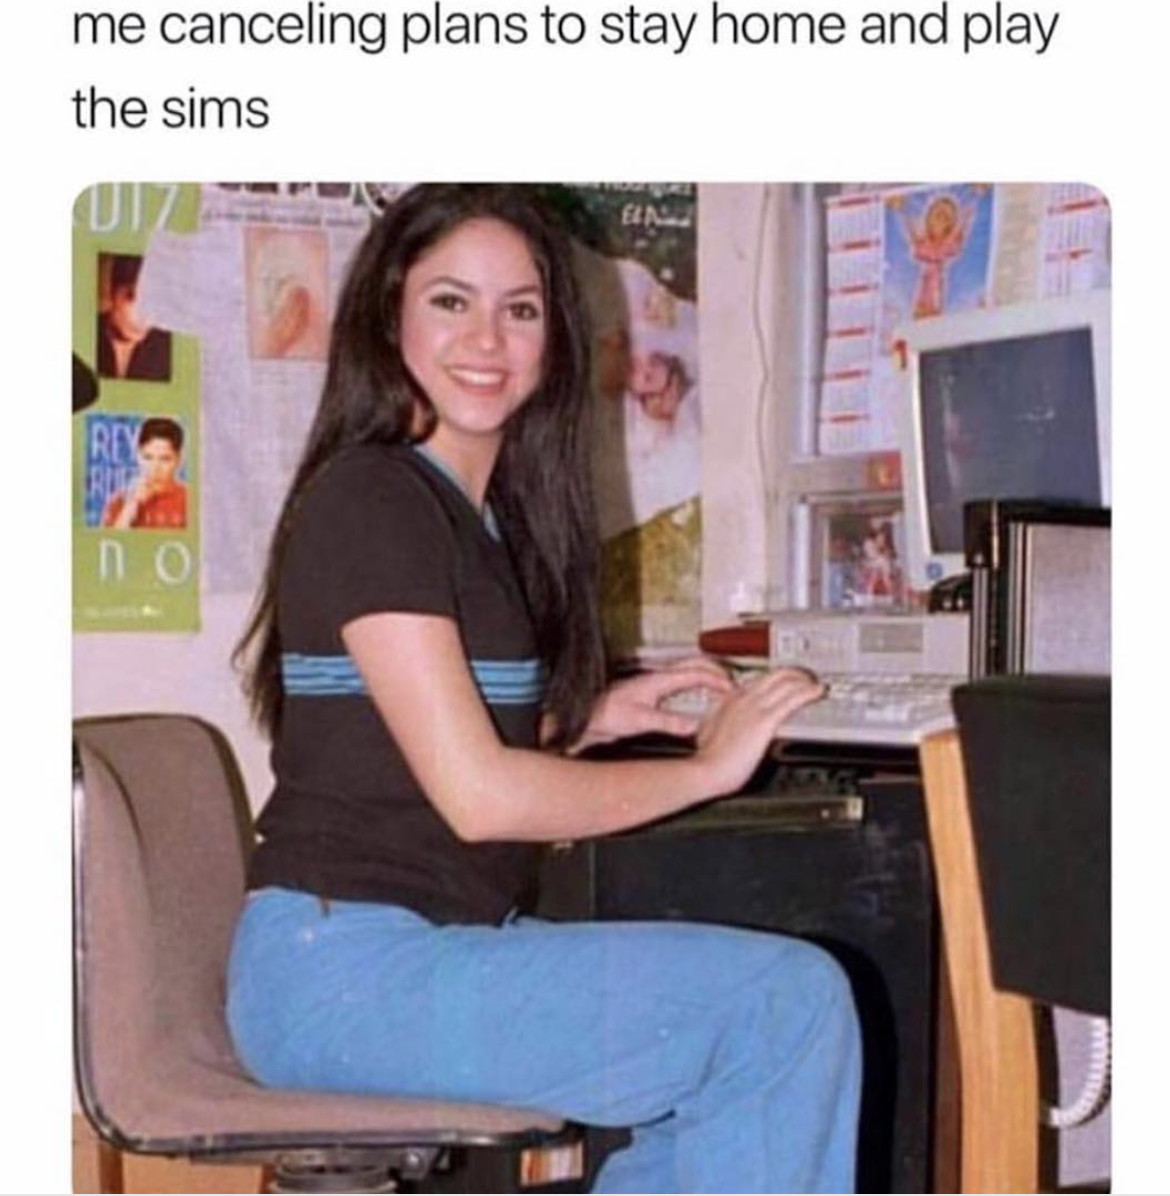 me canceling plans to play sims - me canceling plans to stay home and play the sims Uiz